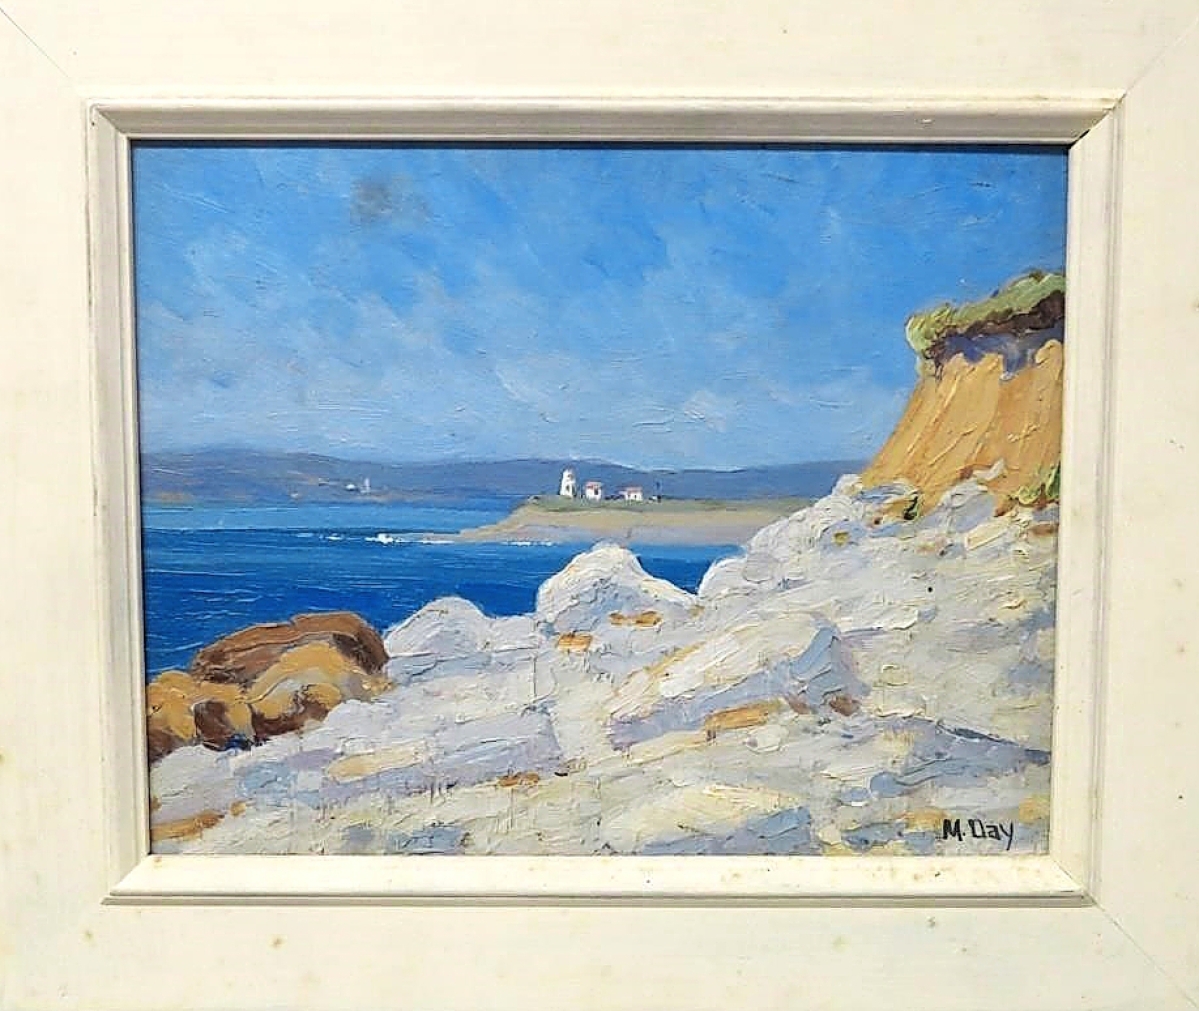 “Low Tide” by Mabel Killam Day (1884-1960), oil on board, 9¾ by 12¼ inches, $2,930.